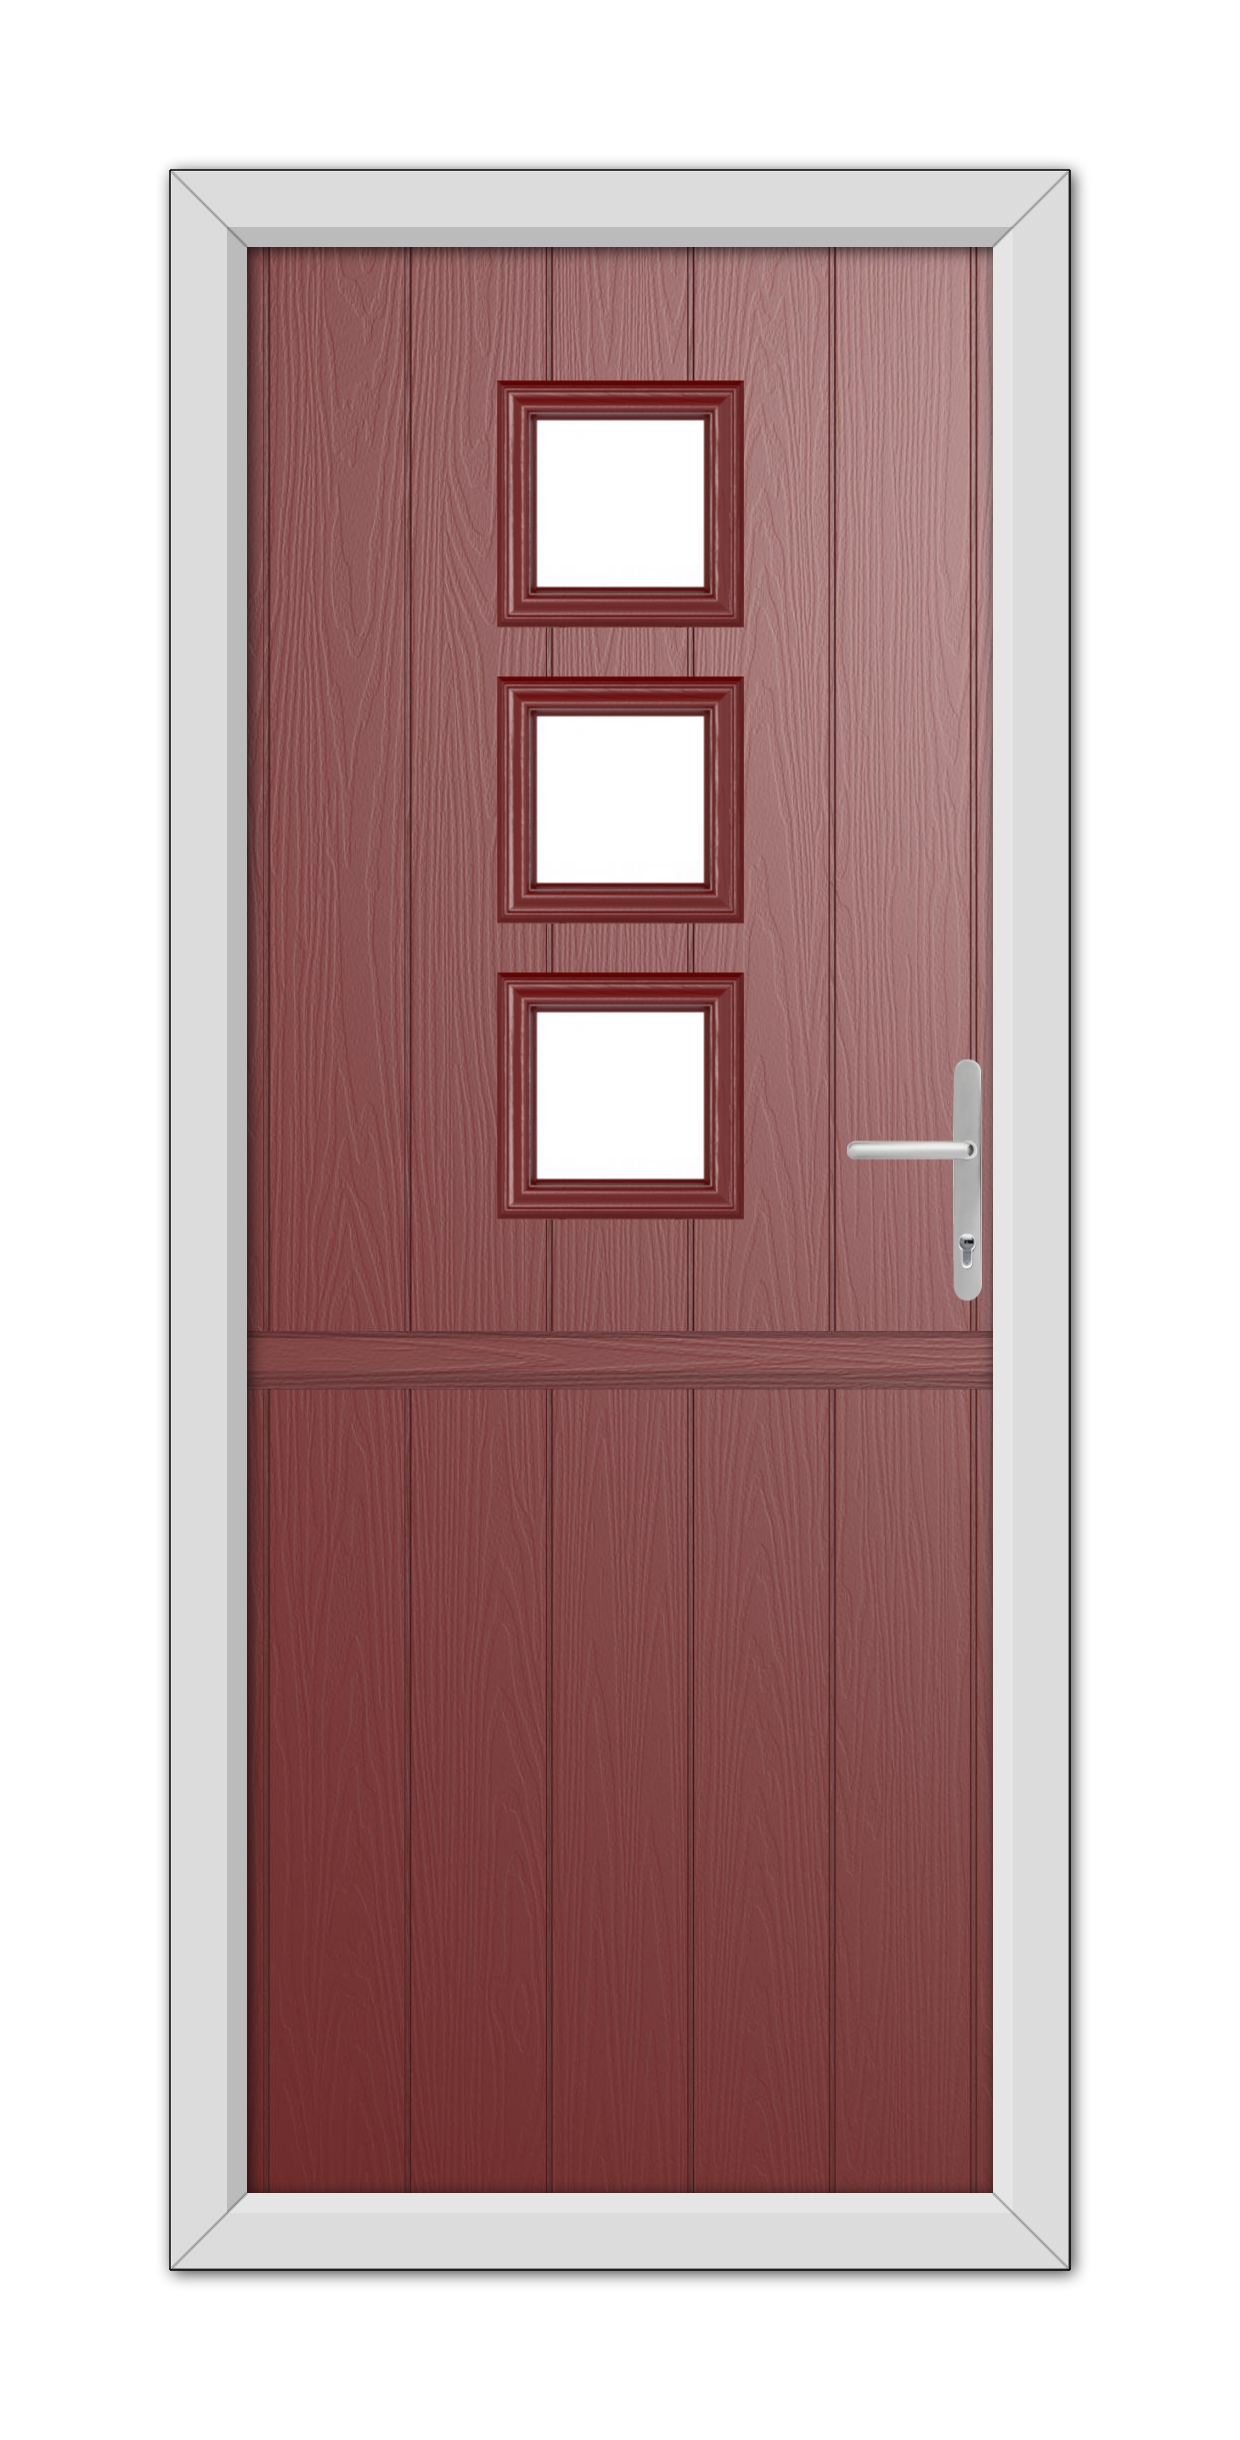 A modern Red Montrose Stable Composite Door 48mm Timber Core with three square glass panels and a metallic handle, set within a white frame.